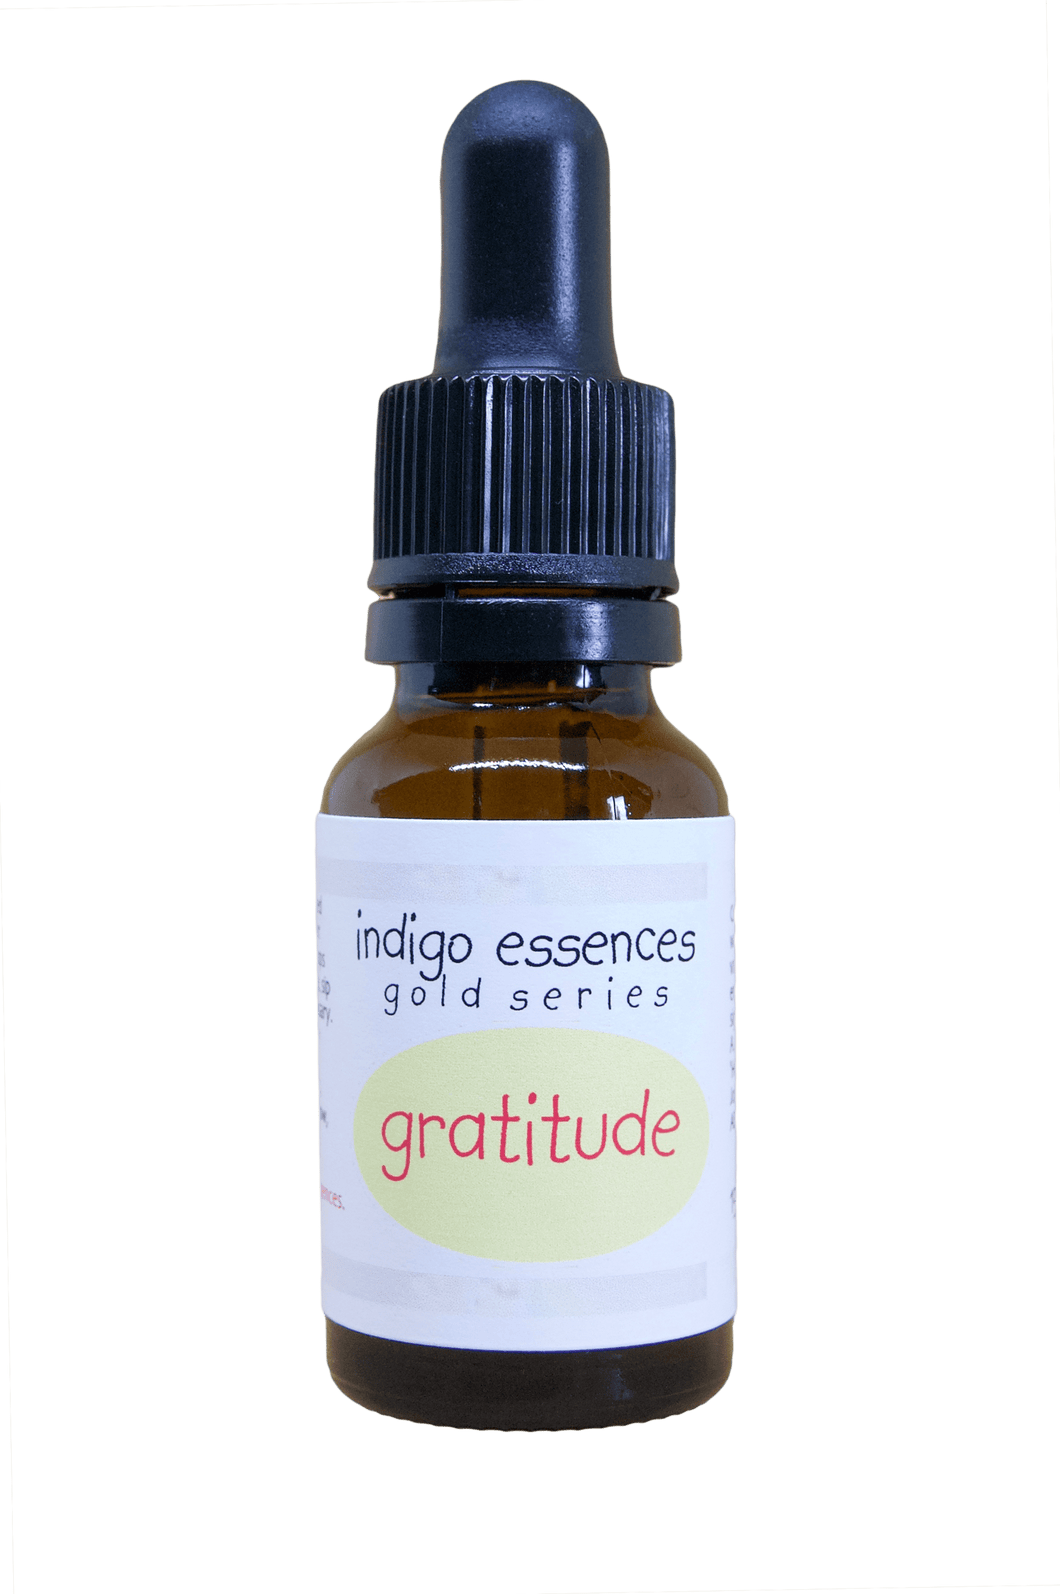 Gratitude - For when you're stuck in a funk